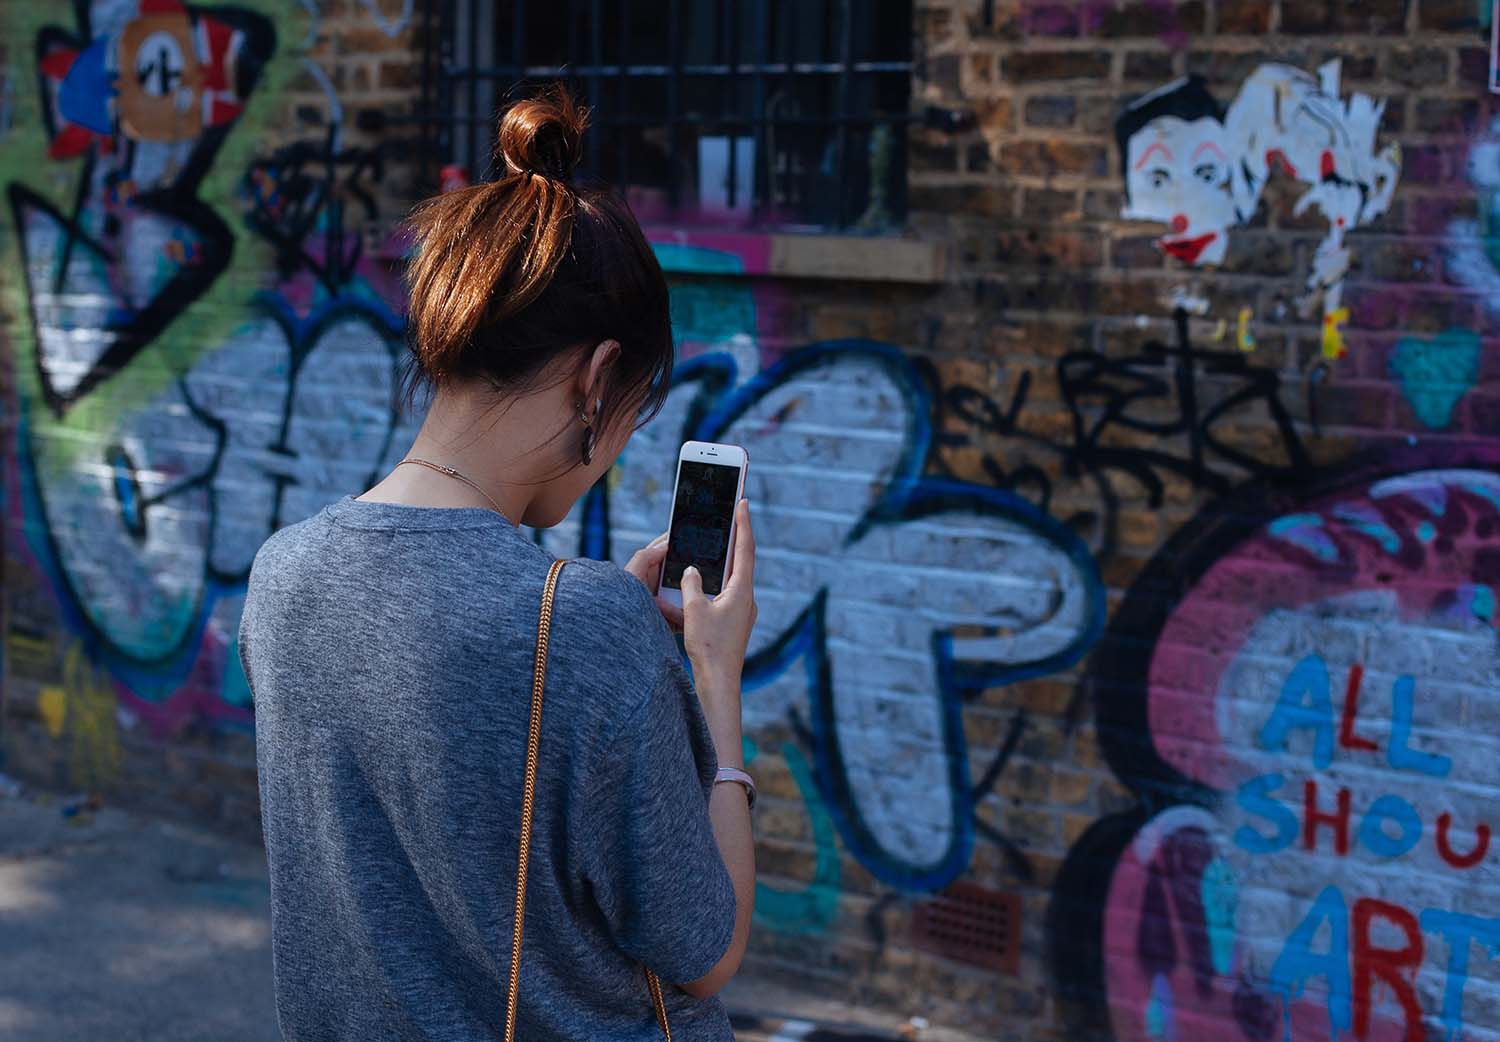 A girl with a bun taking a picture of a design on a wall